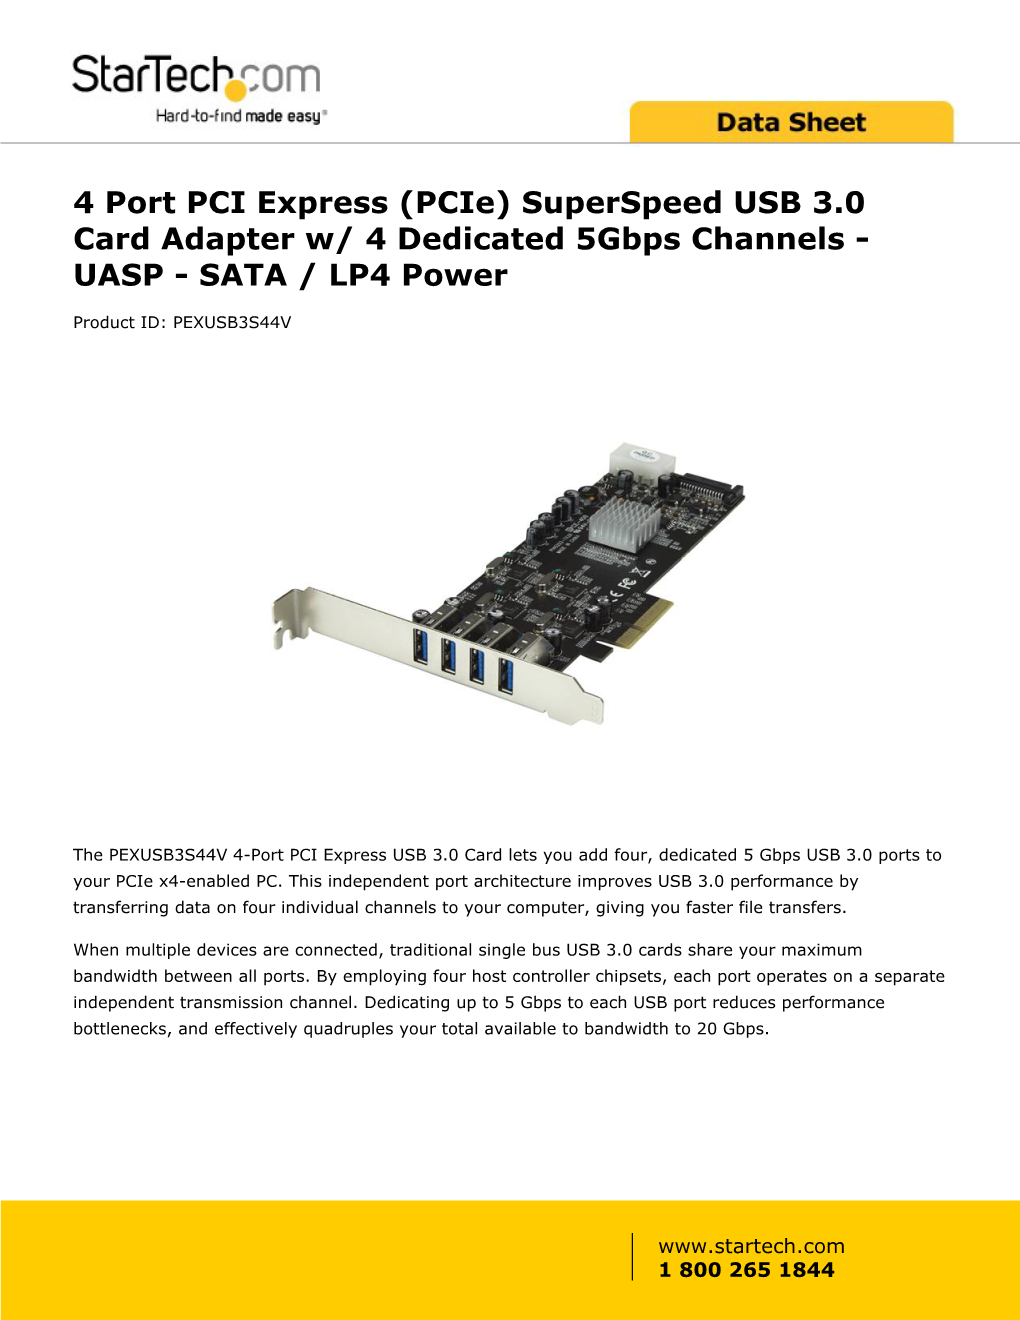 4 Port PCI Express (Pcie) Superspeed USB 3.0 Card Adapter W/ 4 Dedicated 5Gbps Channels - UASP - SATA / LP4 Power